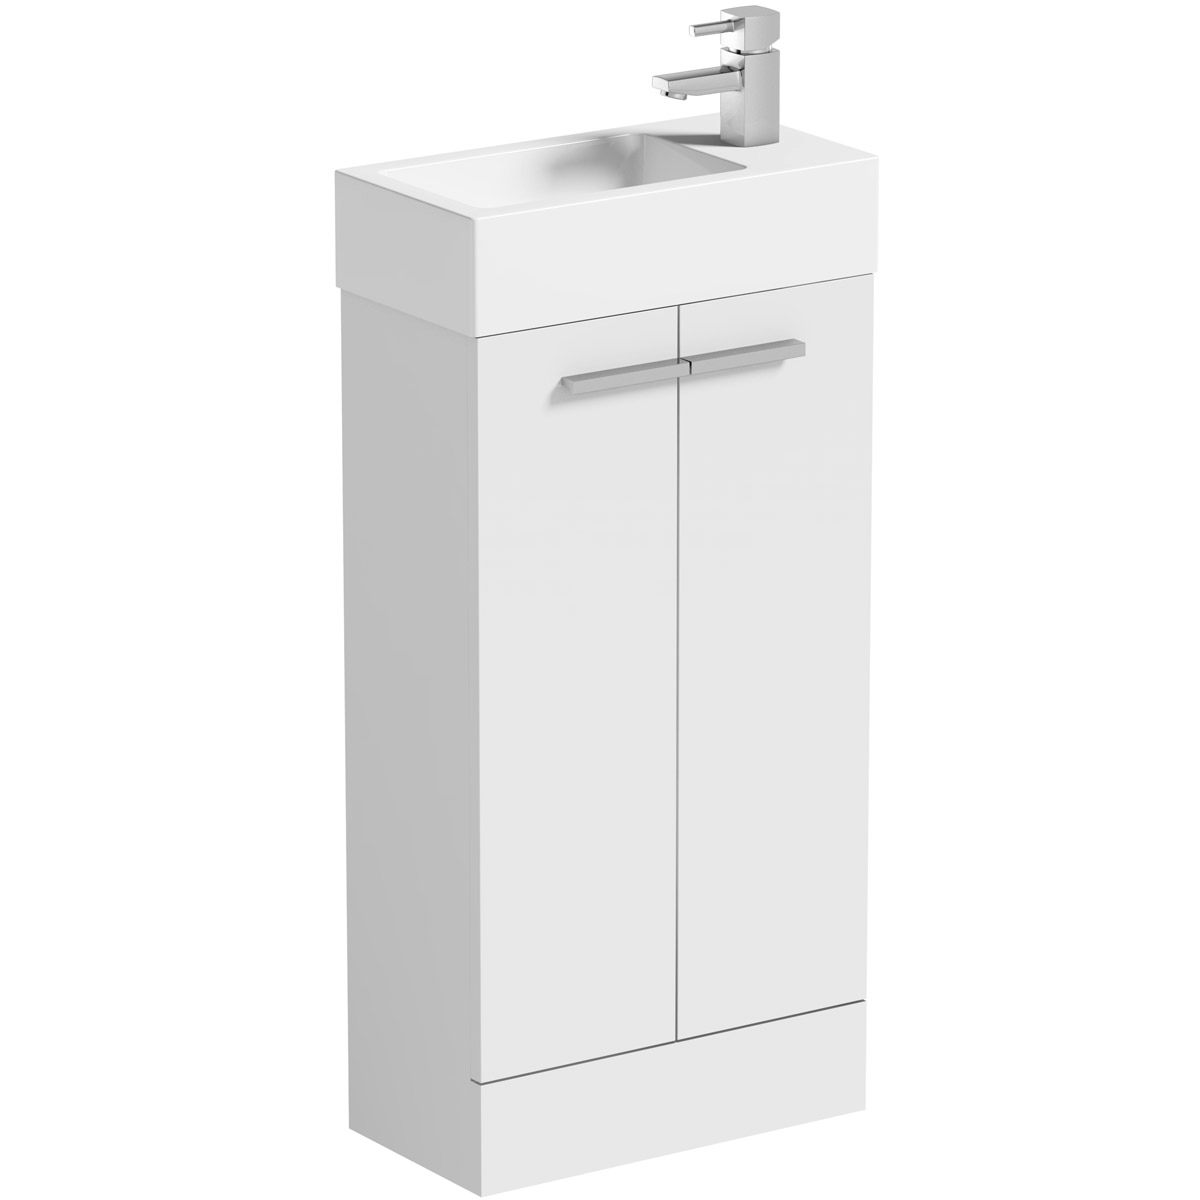 Clarity Compact White Floorstanding, Small White Sink Vanity Unit